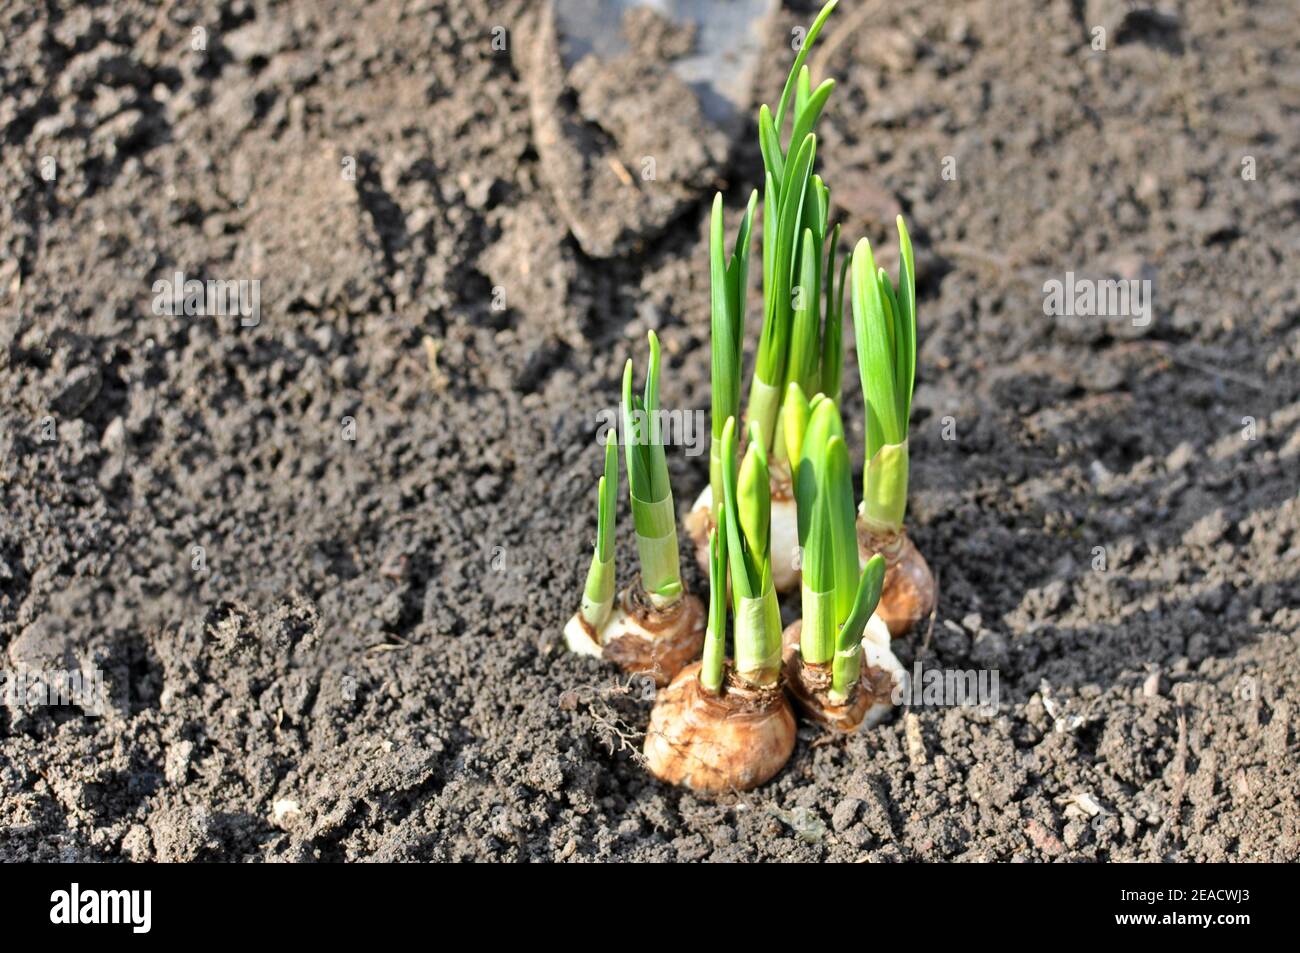 Dirty gardening little row covering with soil a young daffodil flower in spring. Planting concept Stock Photo